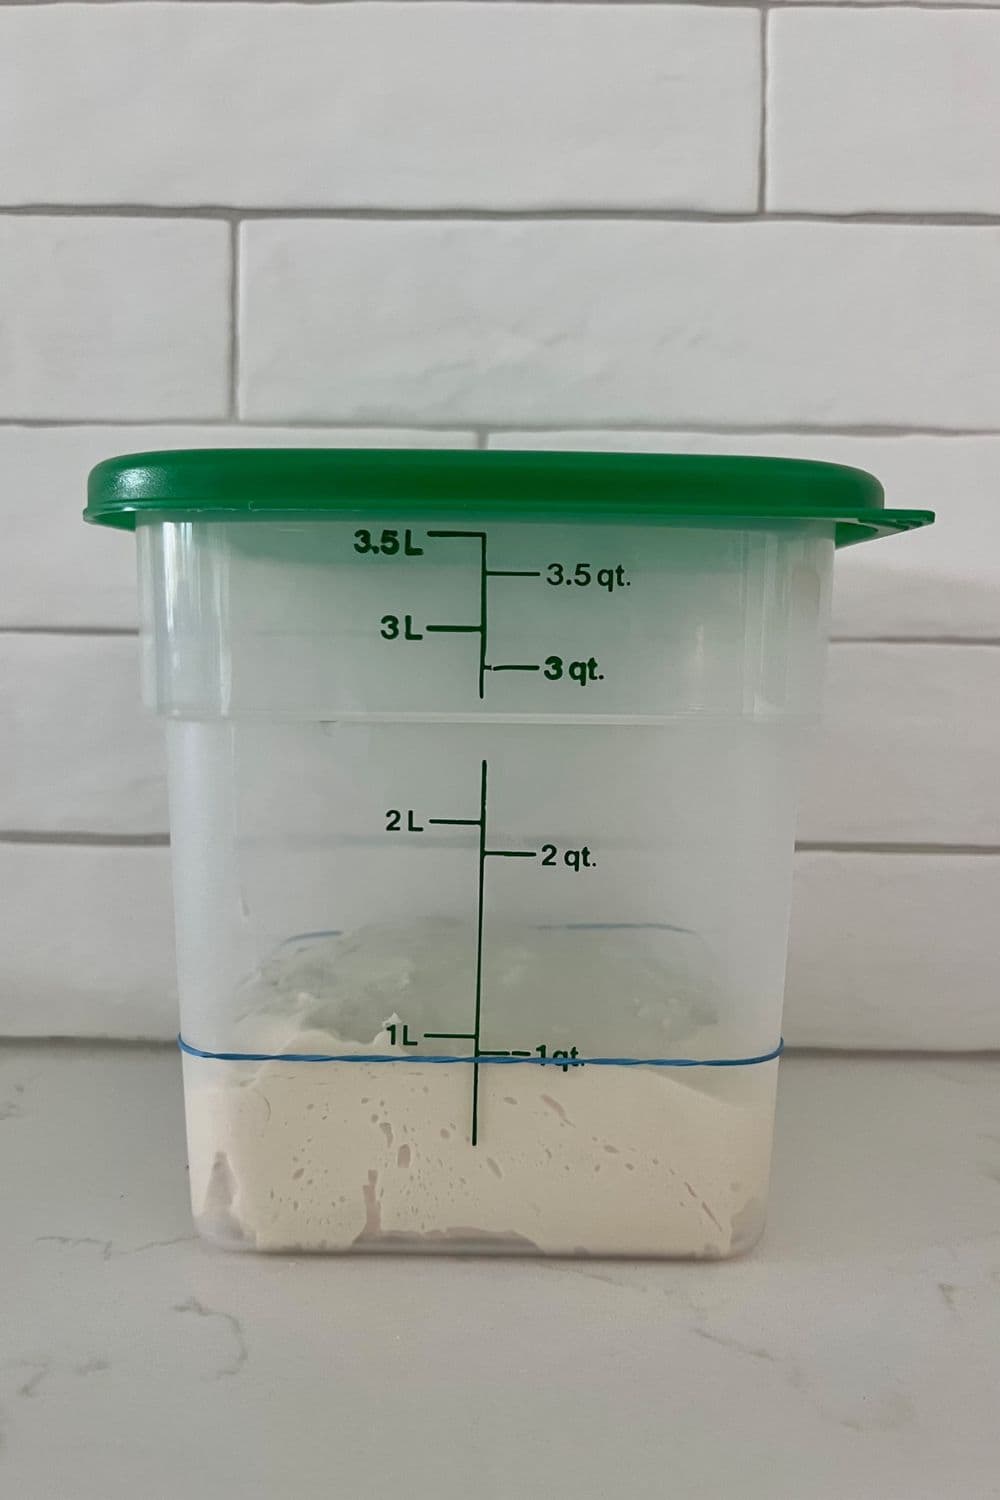 How To Use A Cambro Container for Easy Sourdough Bread Baking - The Pantry  Mama